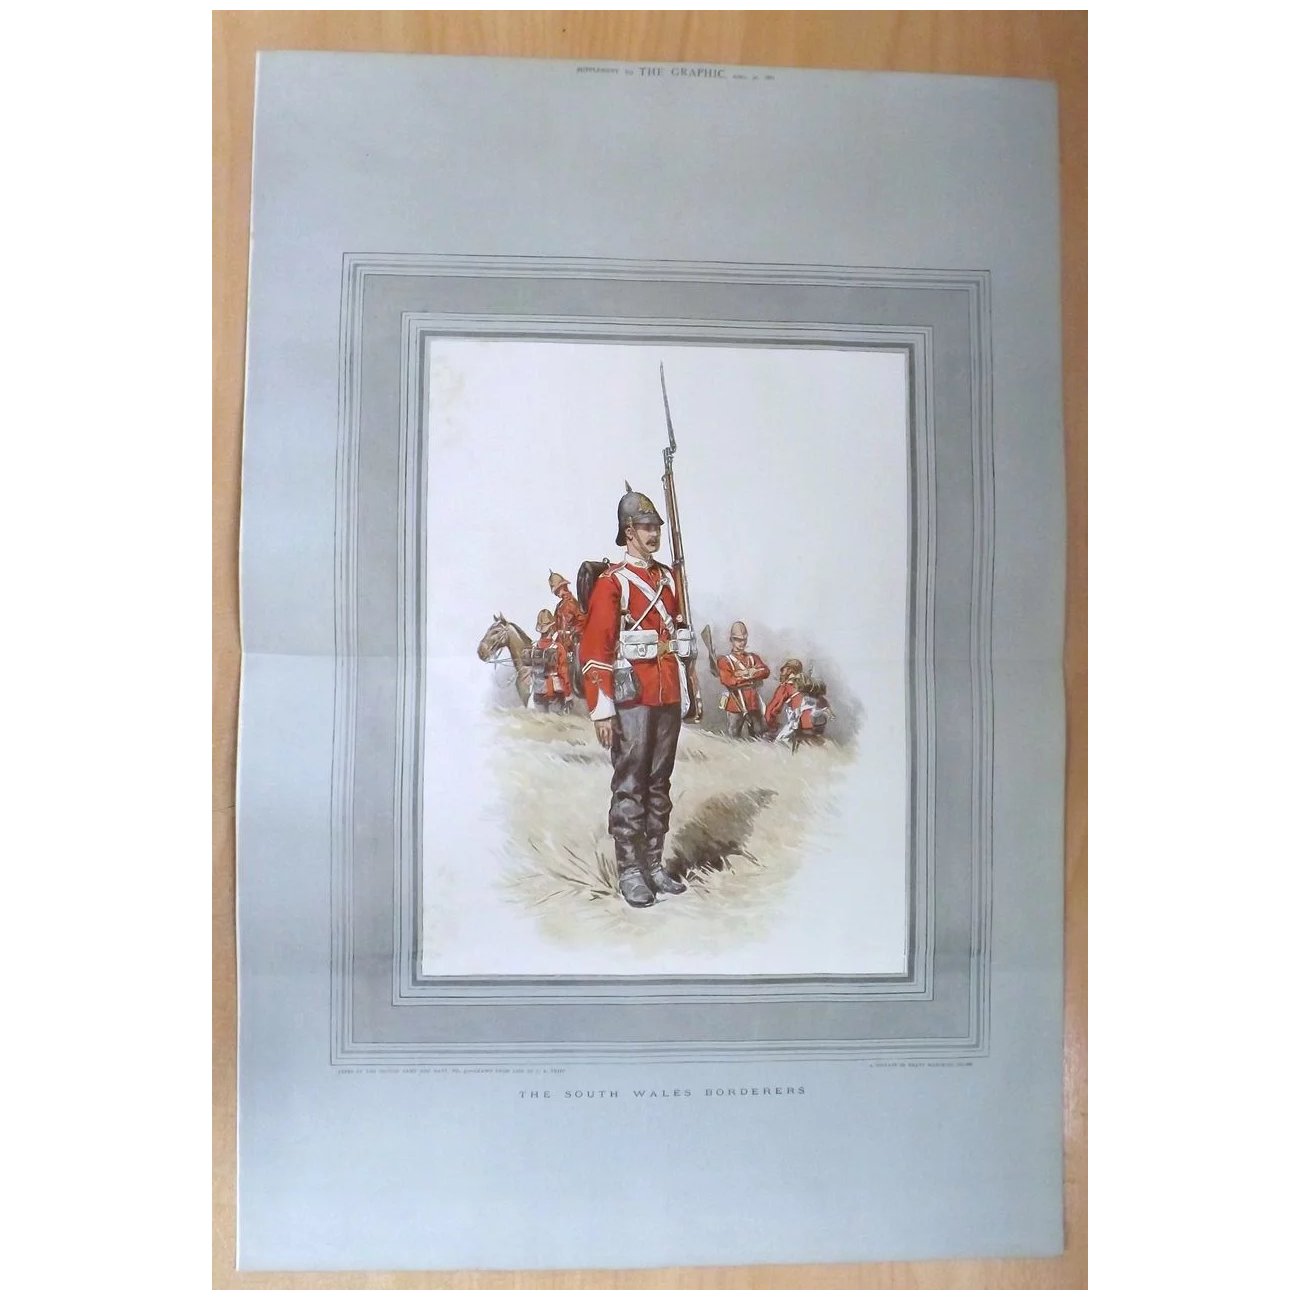 The South Wales Borderers - The Graphic 1887